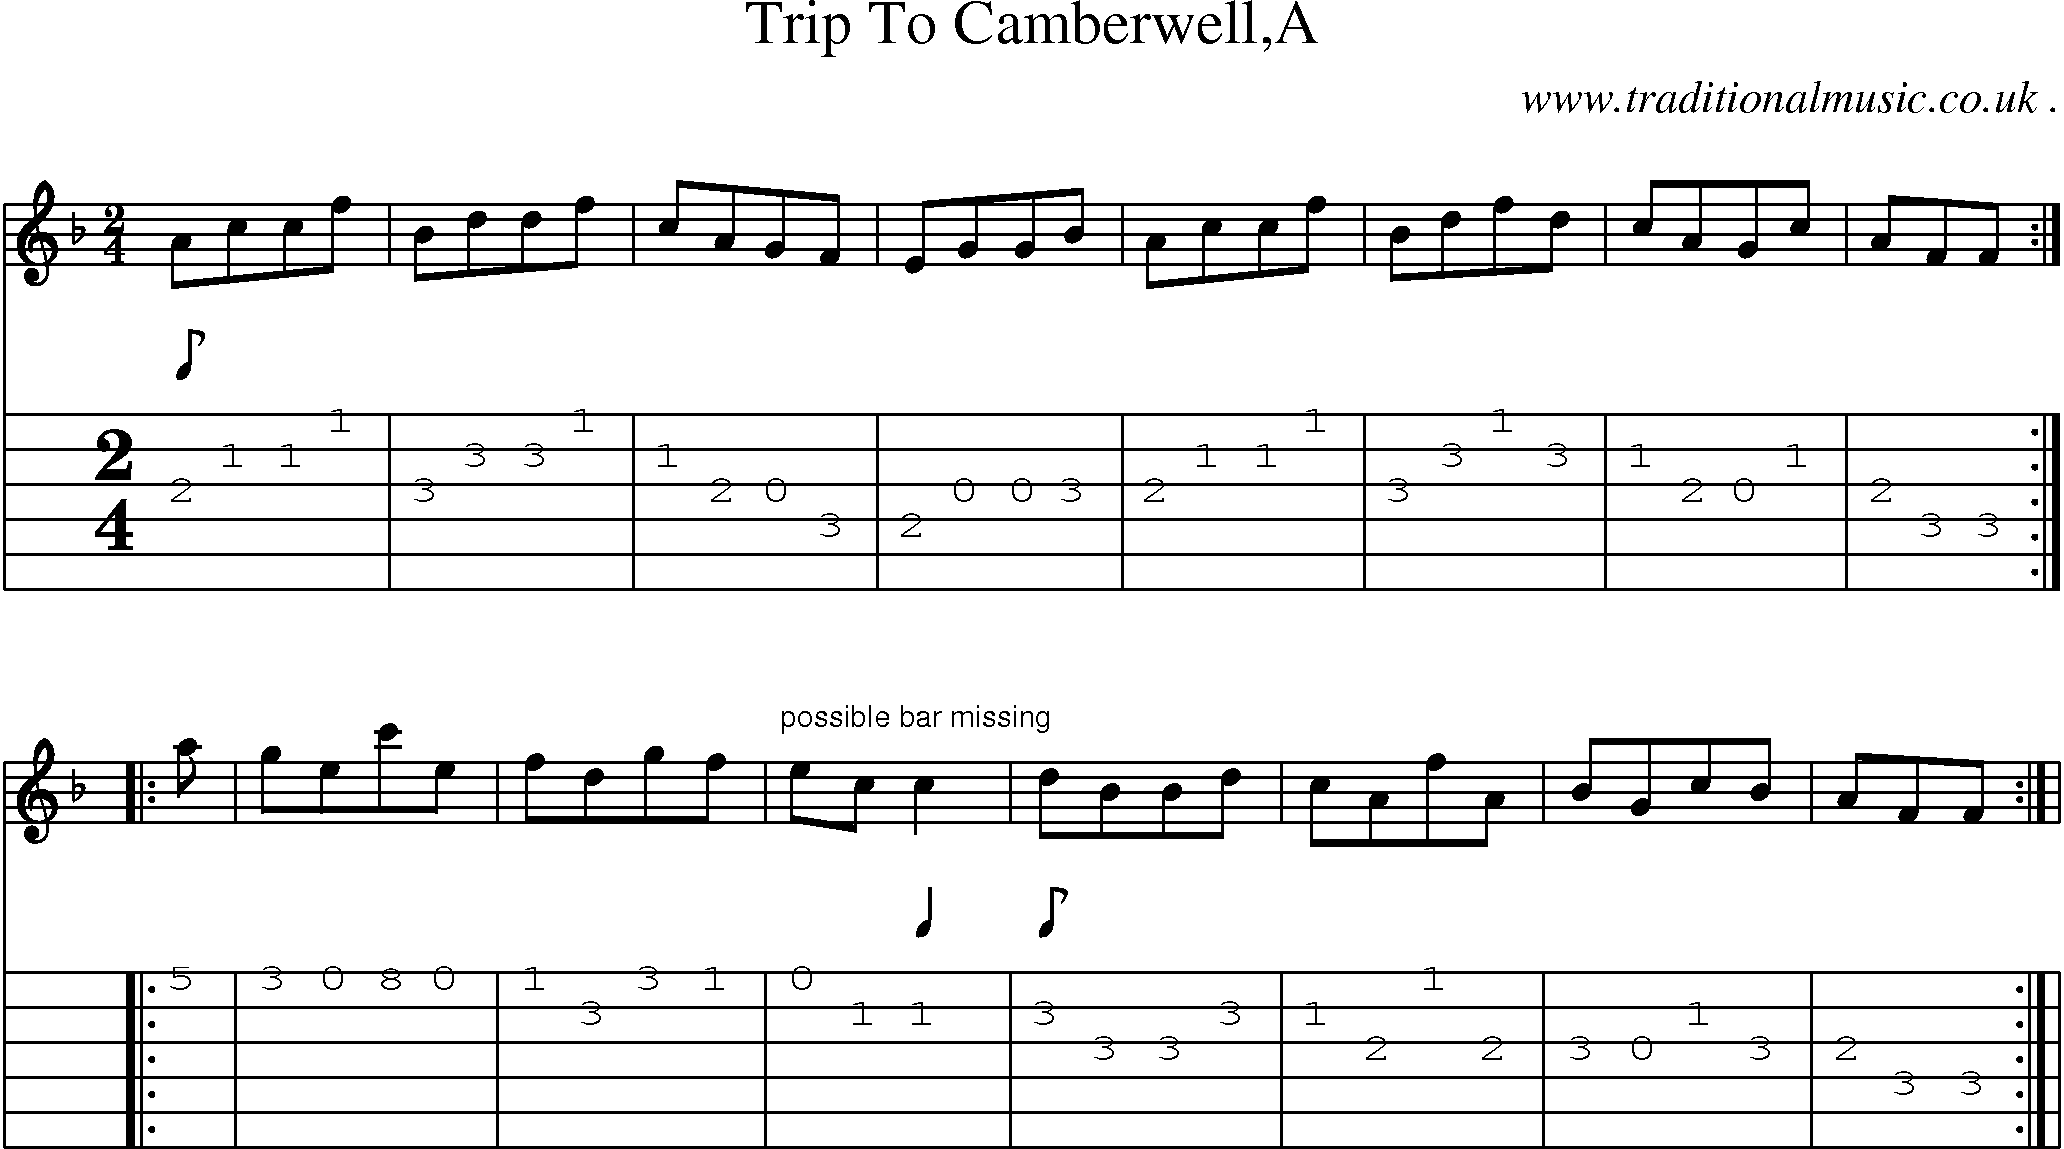 Sheet-Music and Guitar Tabs for Trip To Camberwella